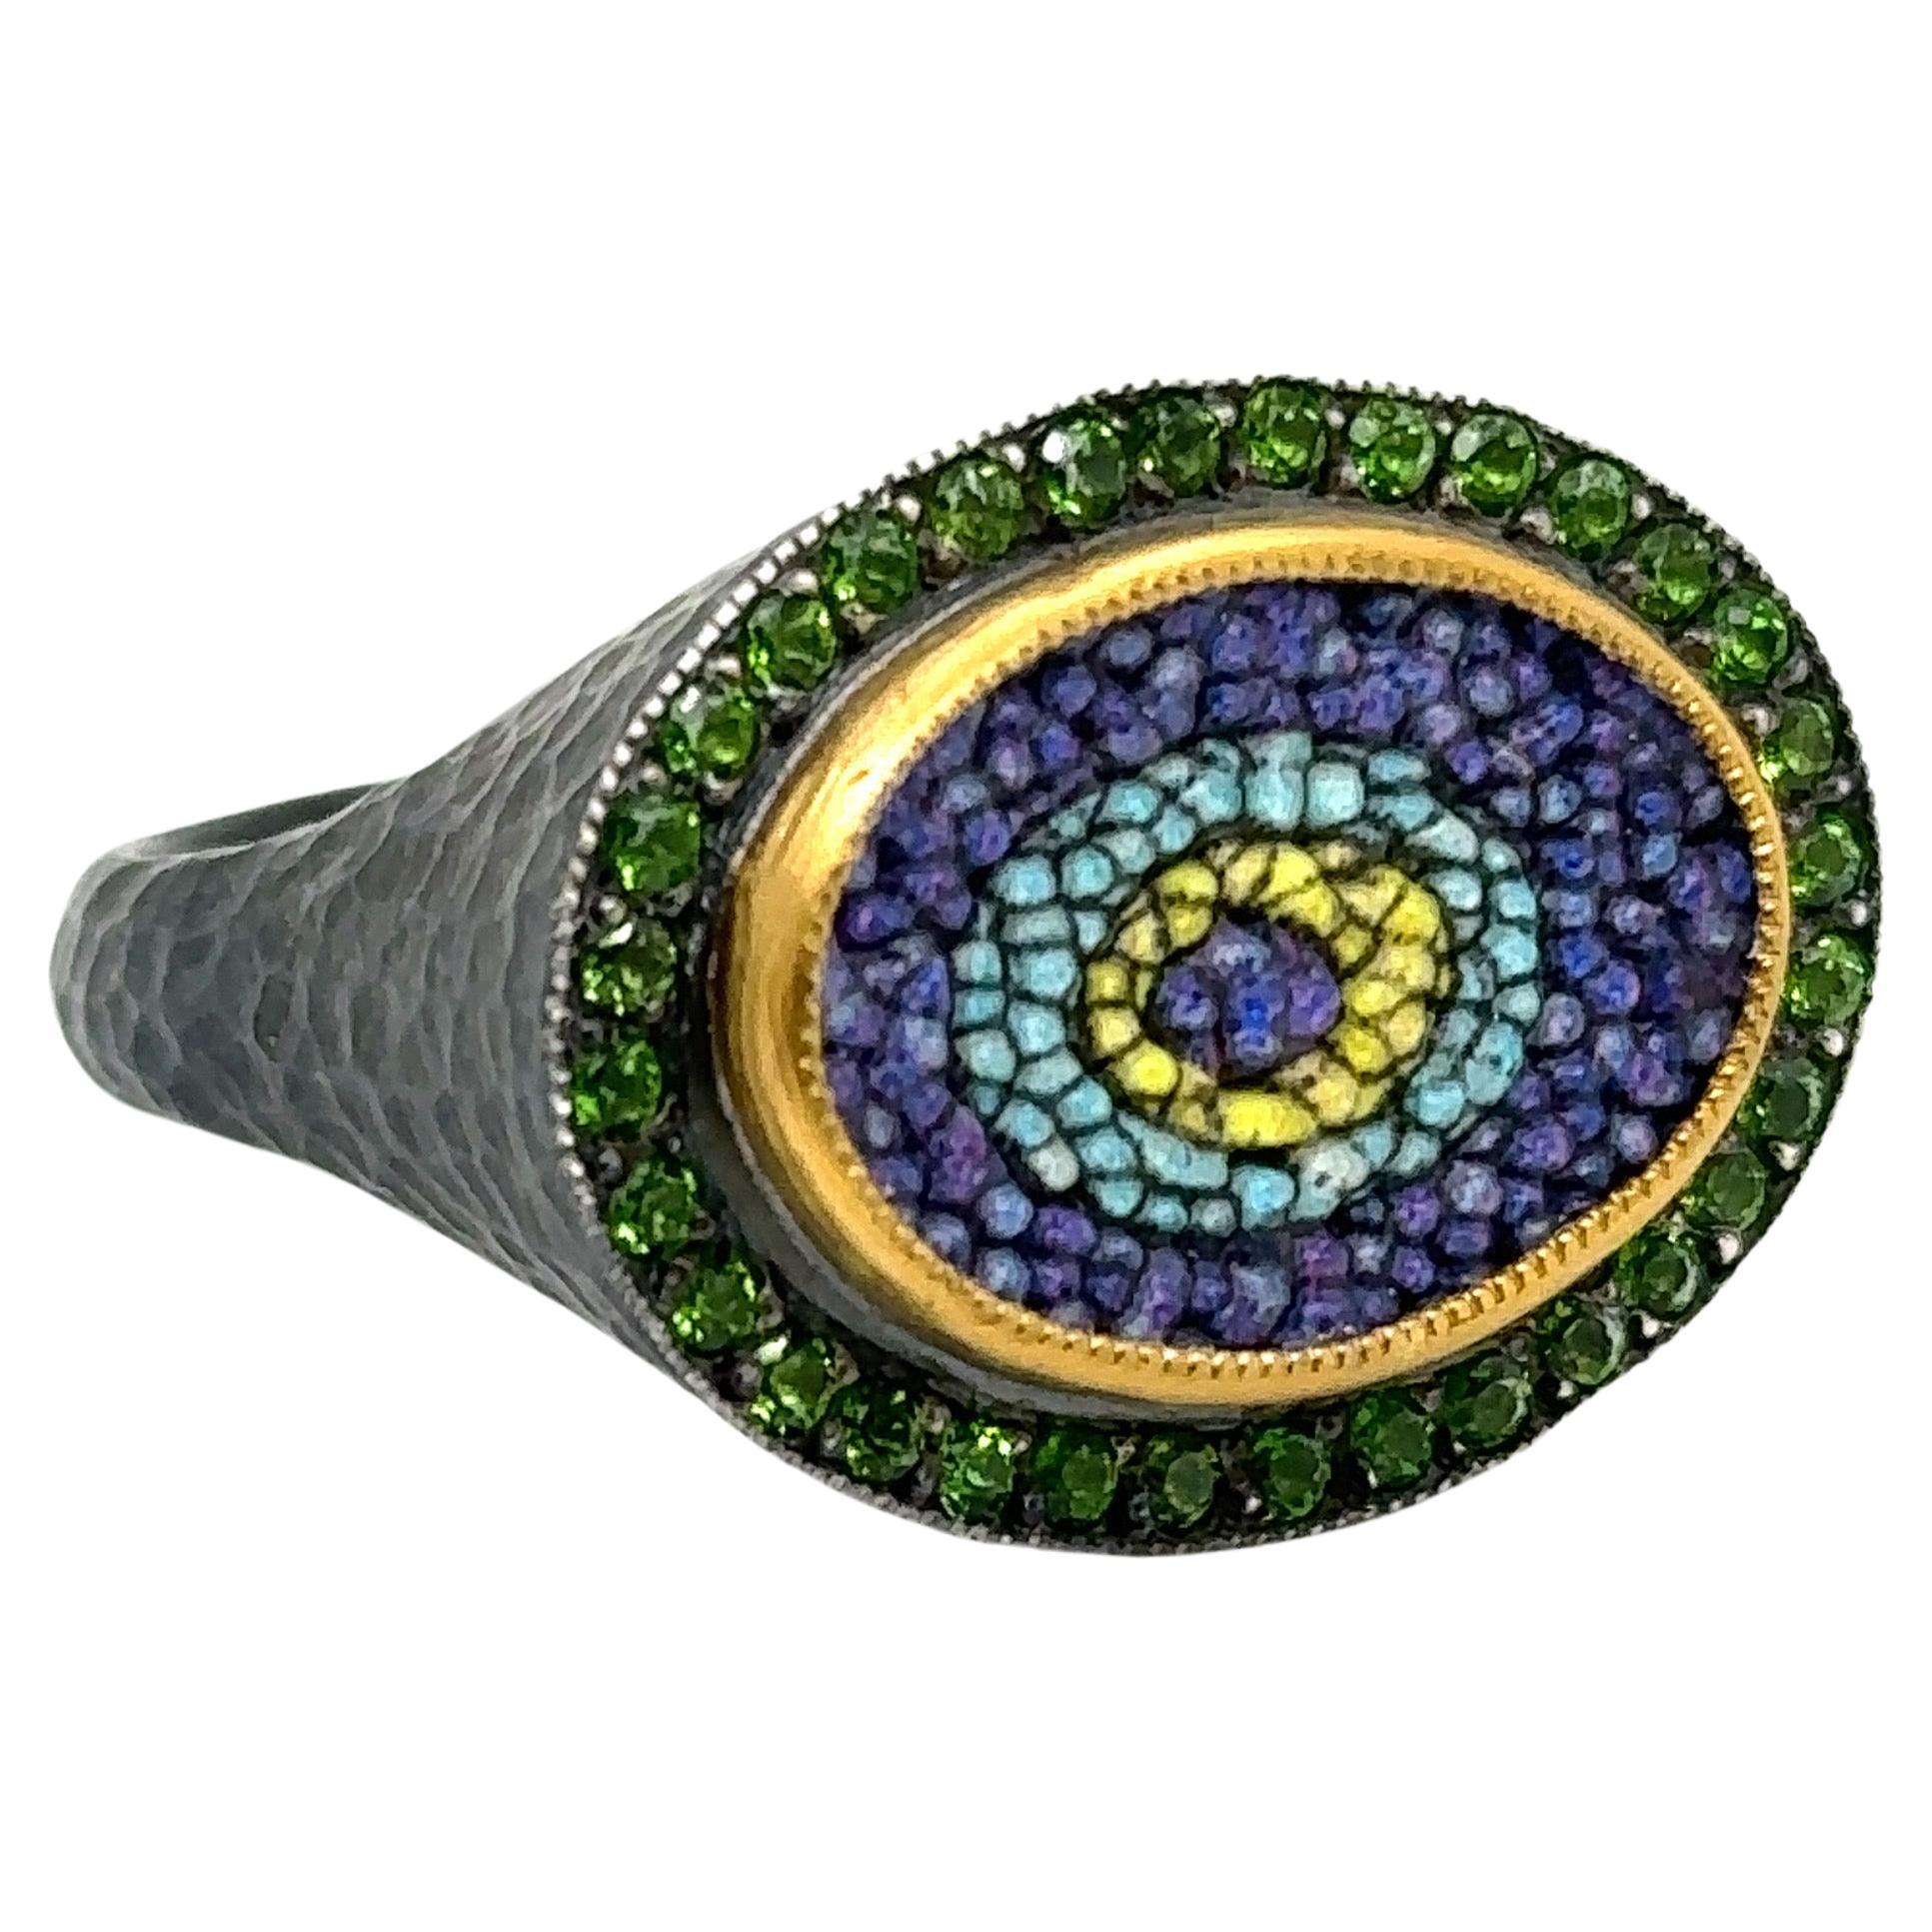 JAS-19-1965 - 24KT GOLD/SS EVIL EYE MOSAIC RING with 0.60CT CHROME DIOPSIDES